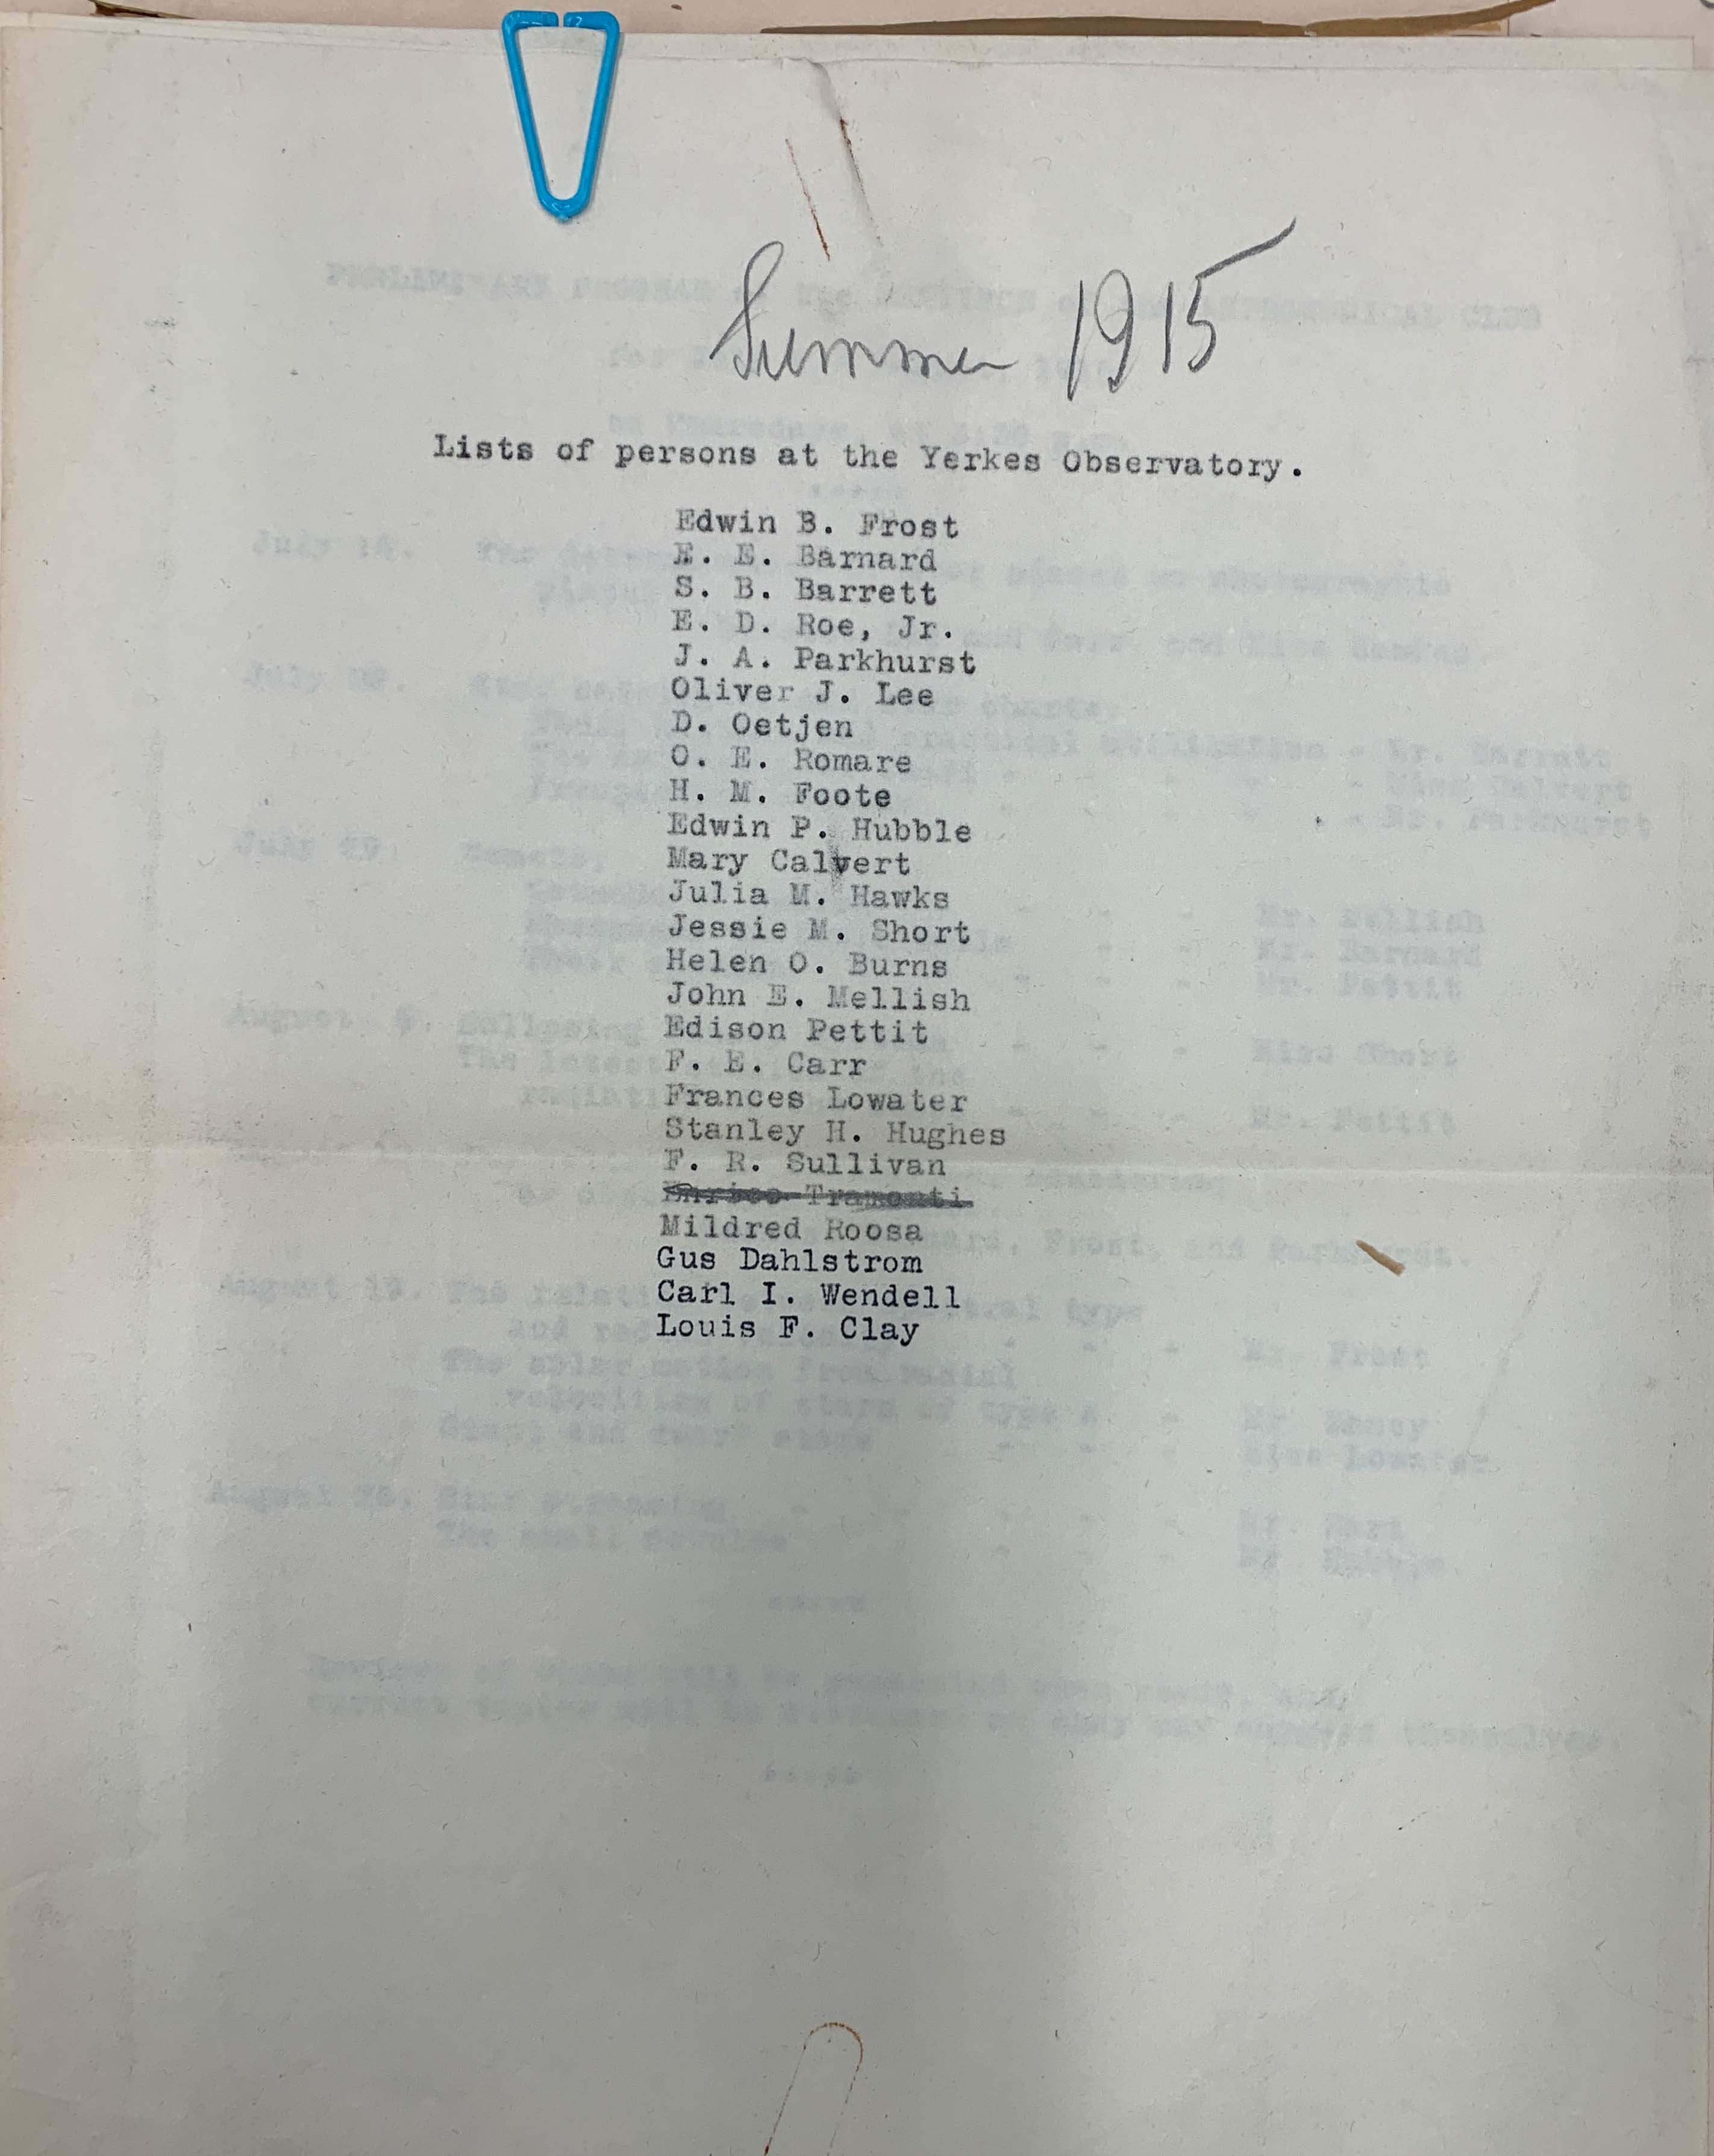 List of names typed on copy paper, "summer 1915" written in pencil at the top.